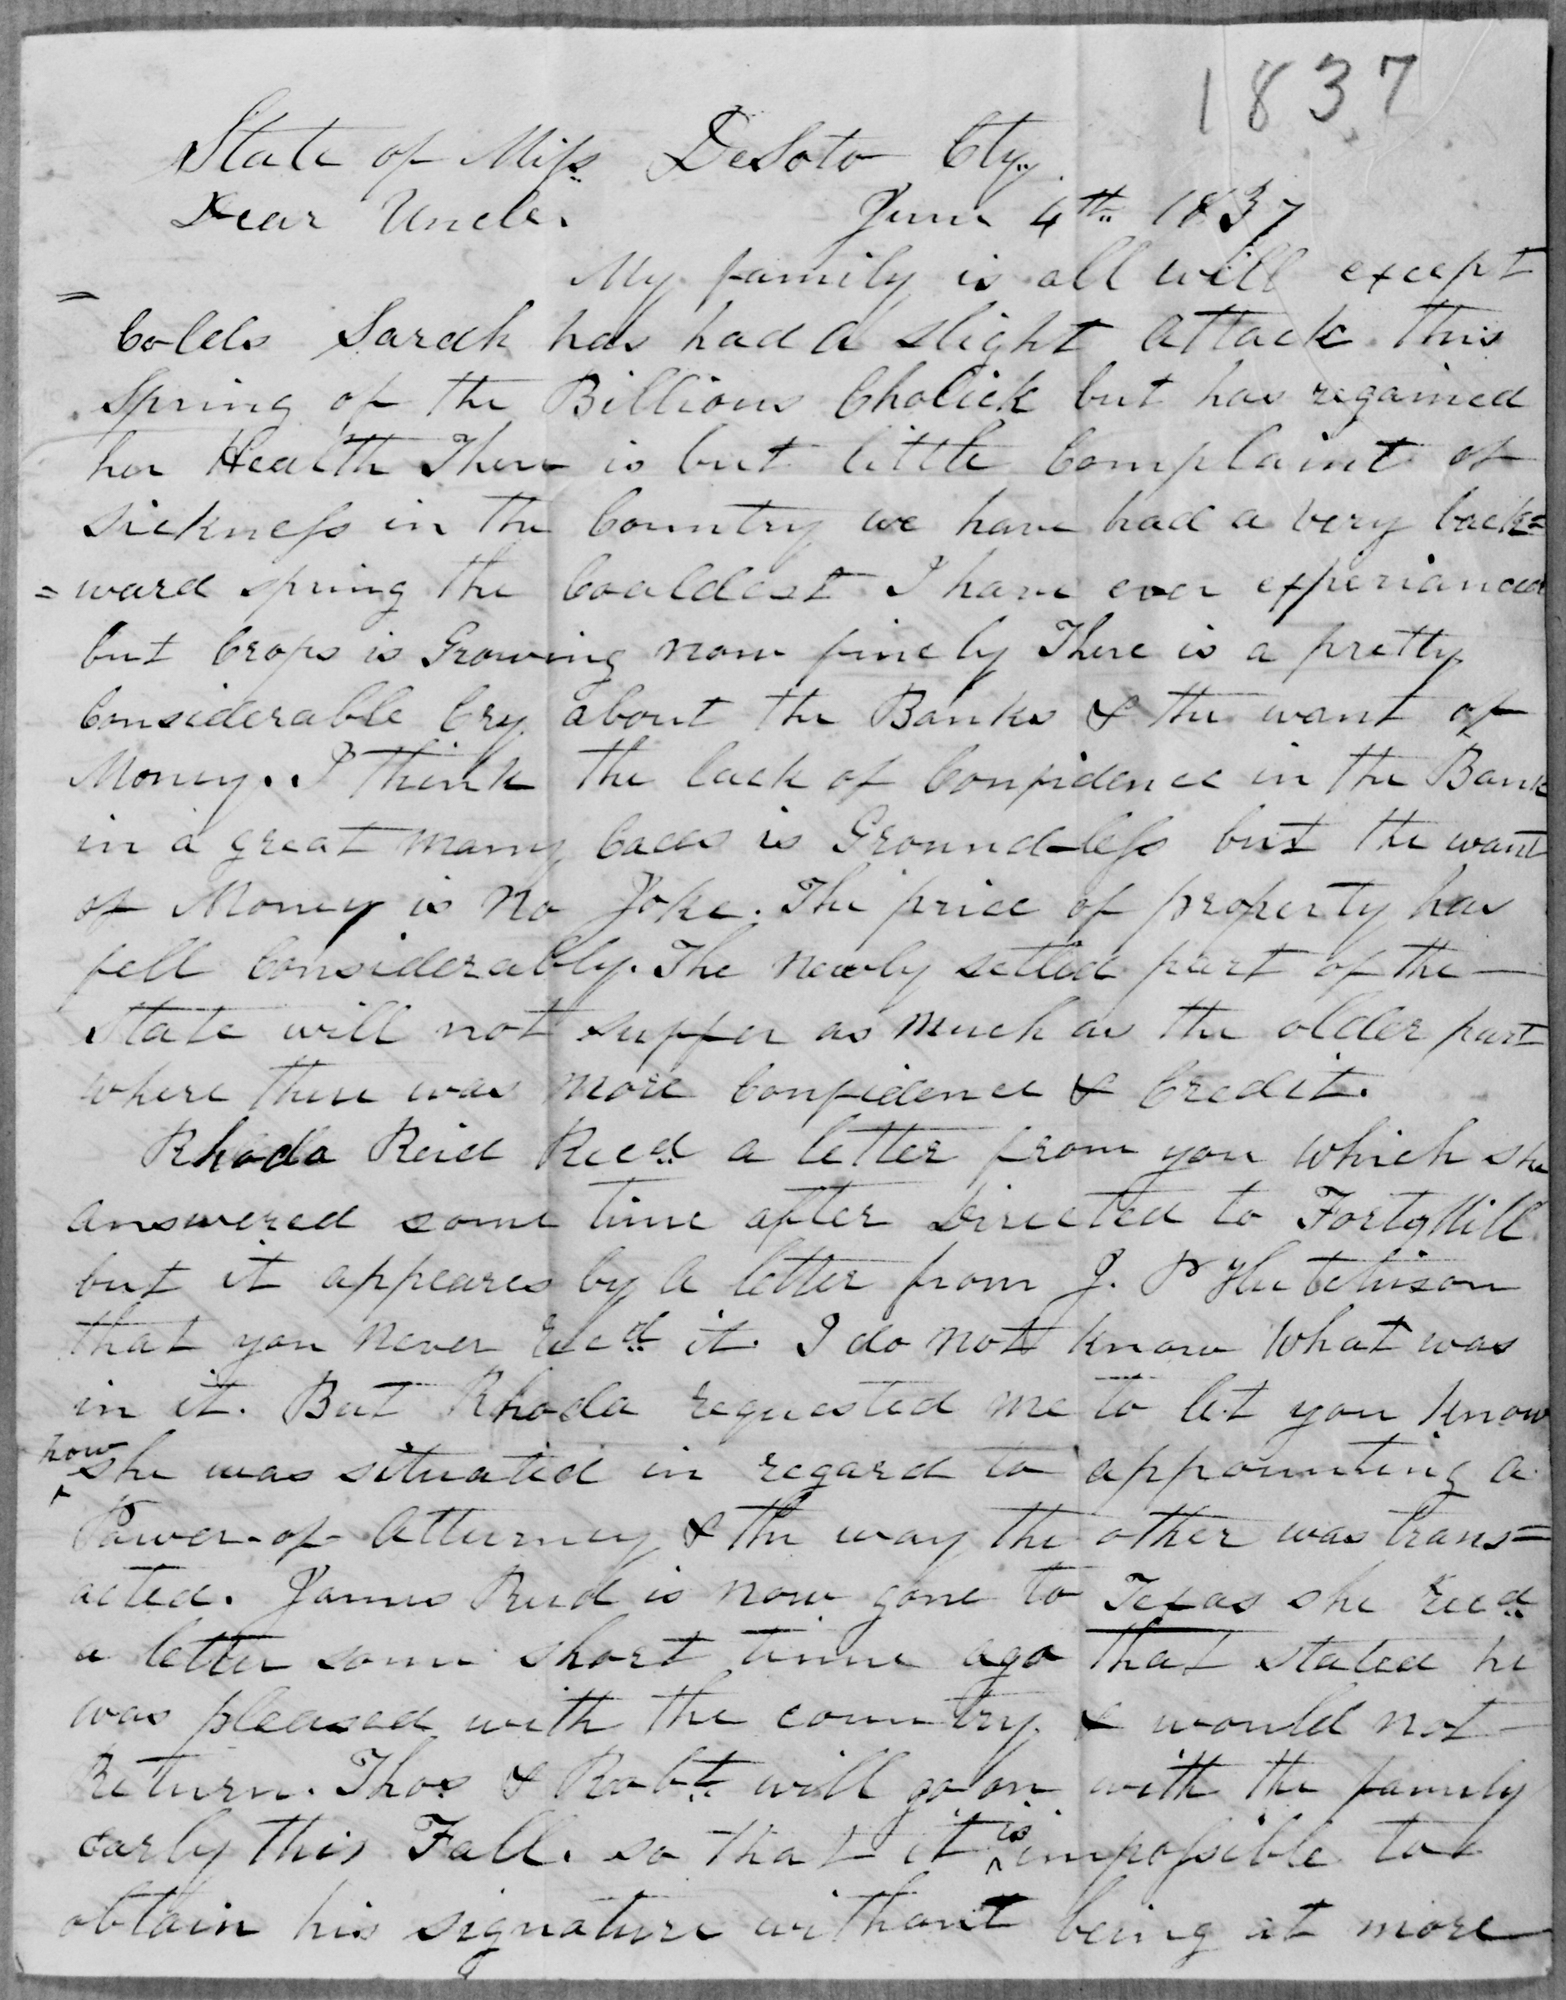 Letter from DeSoto City, Miss., to David Hutchison from his Nephew - A.R. Hutchison, P. 1,  R&R Note: Letter to David Hutchison from Rhoda & Thomas Reid, dated March 30, 1837 from Desoto County, Mississippi.  Discussing a power of attorney.